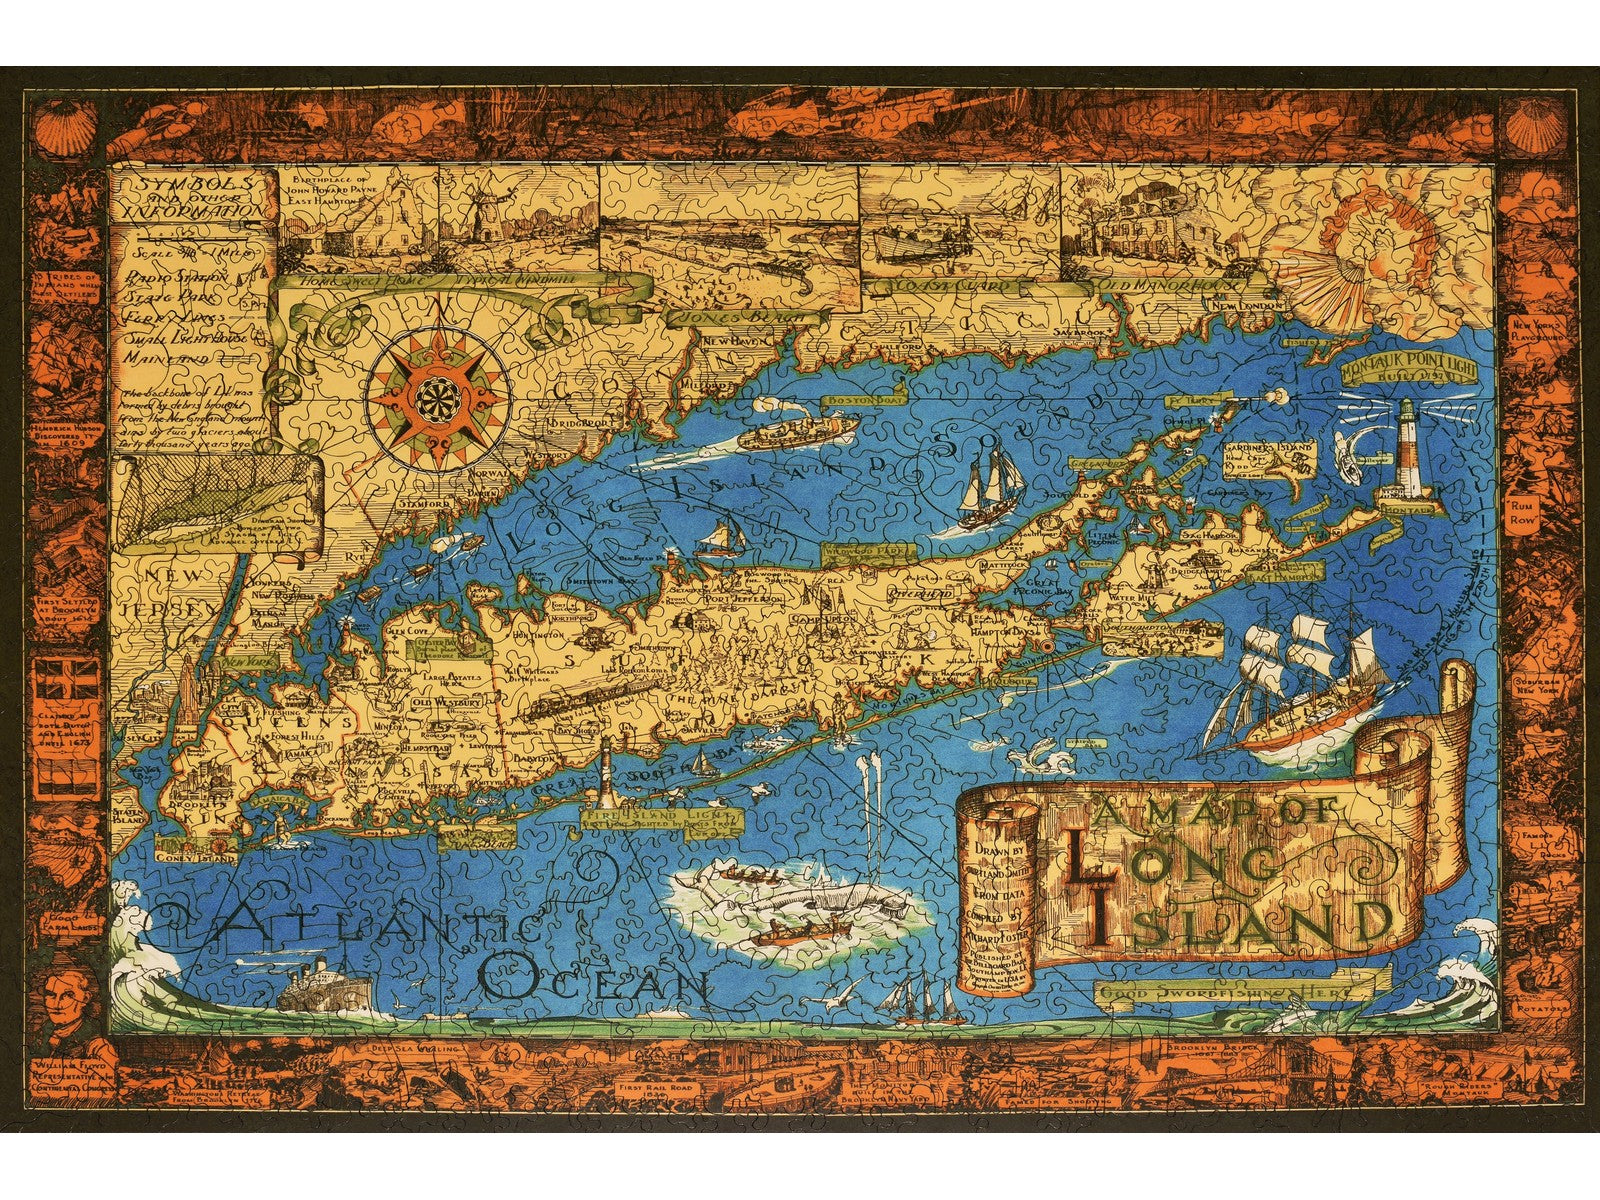 The front of the puzzle, Map of Long Island, which shows an antique map of Long Island.